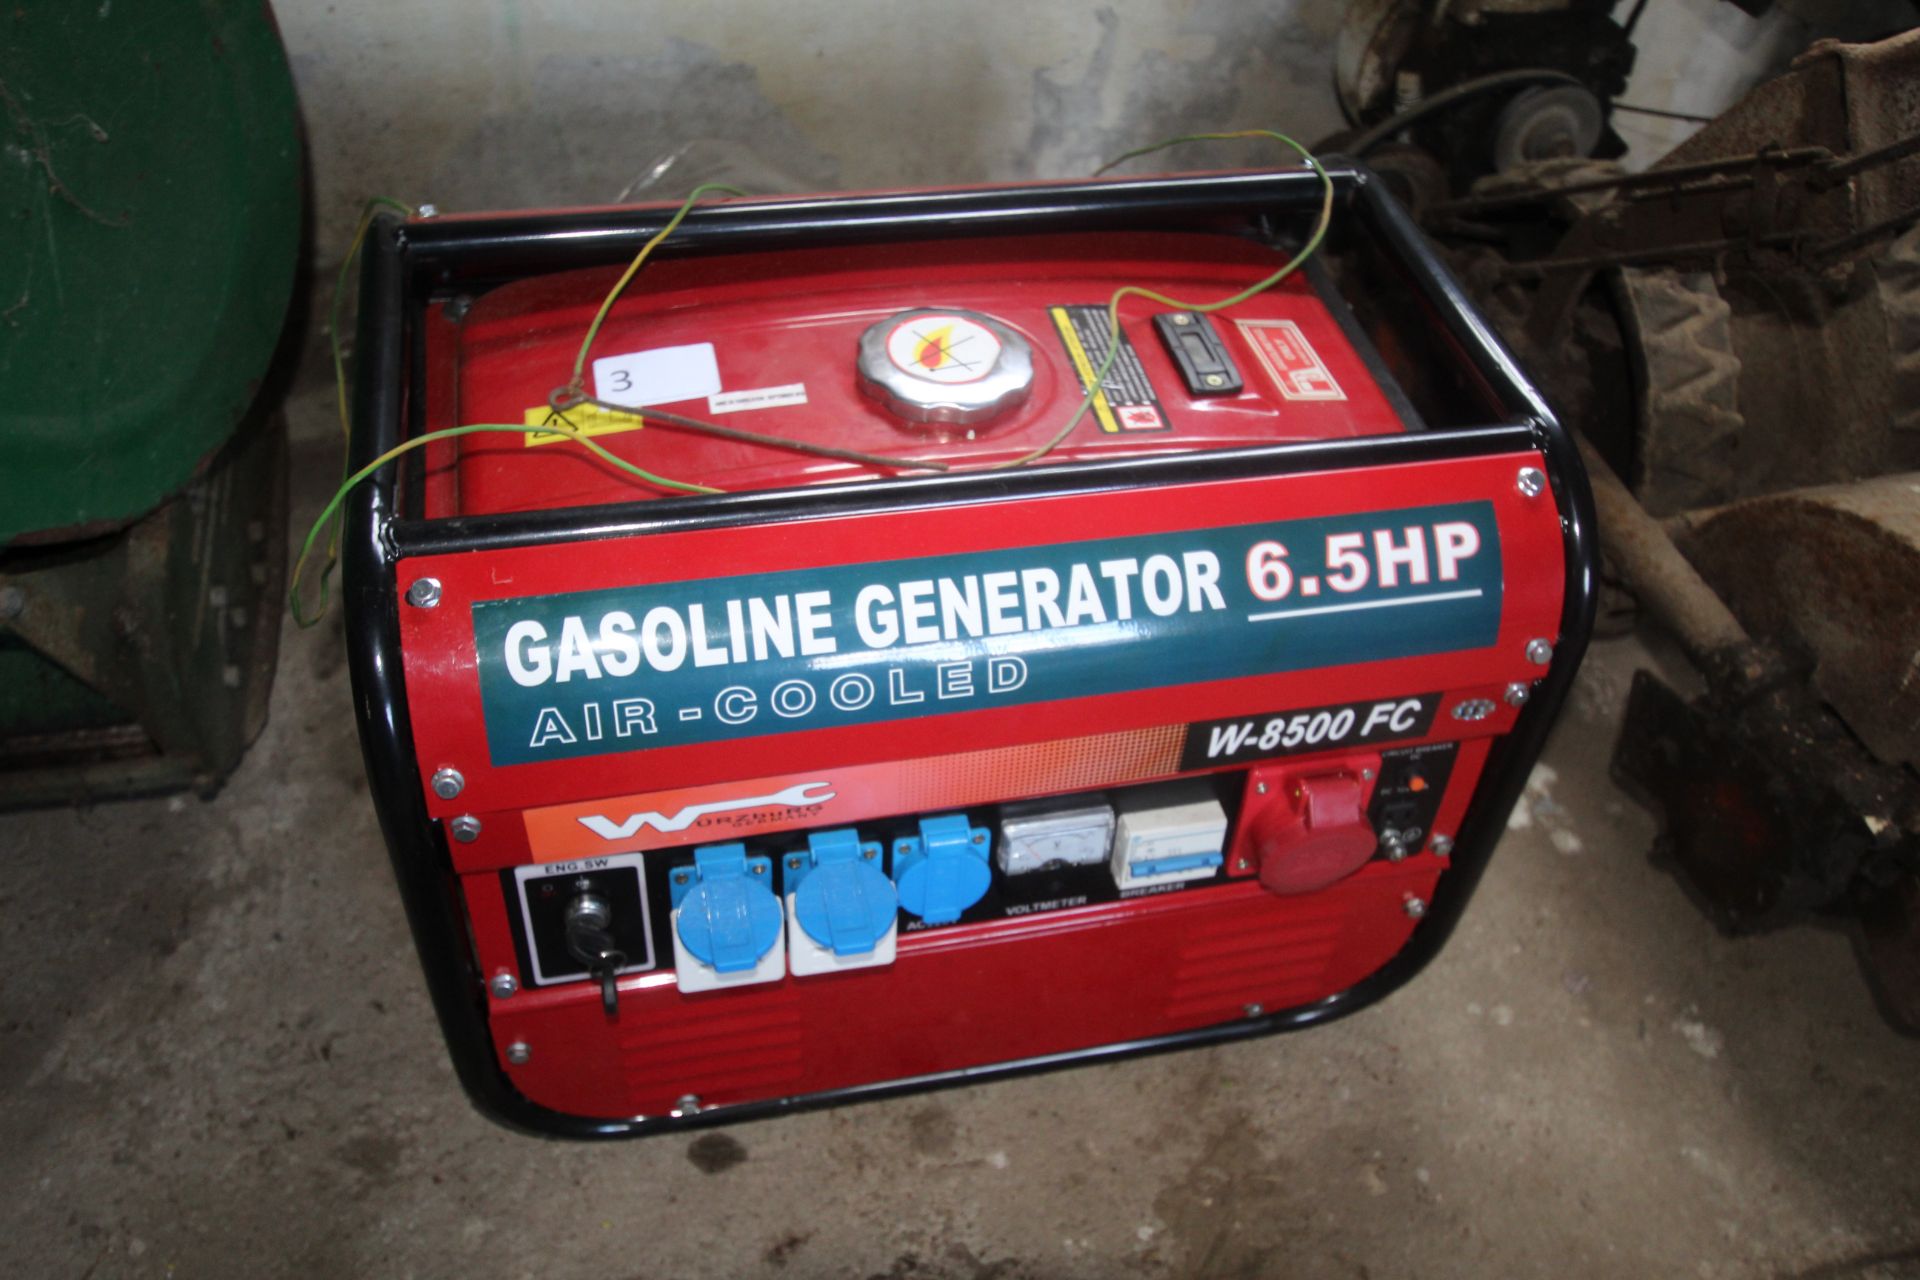 6.5hp petrol generator as new but requires a petrol pipe.